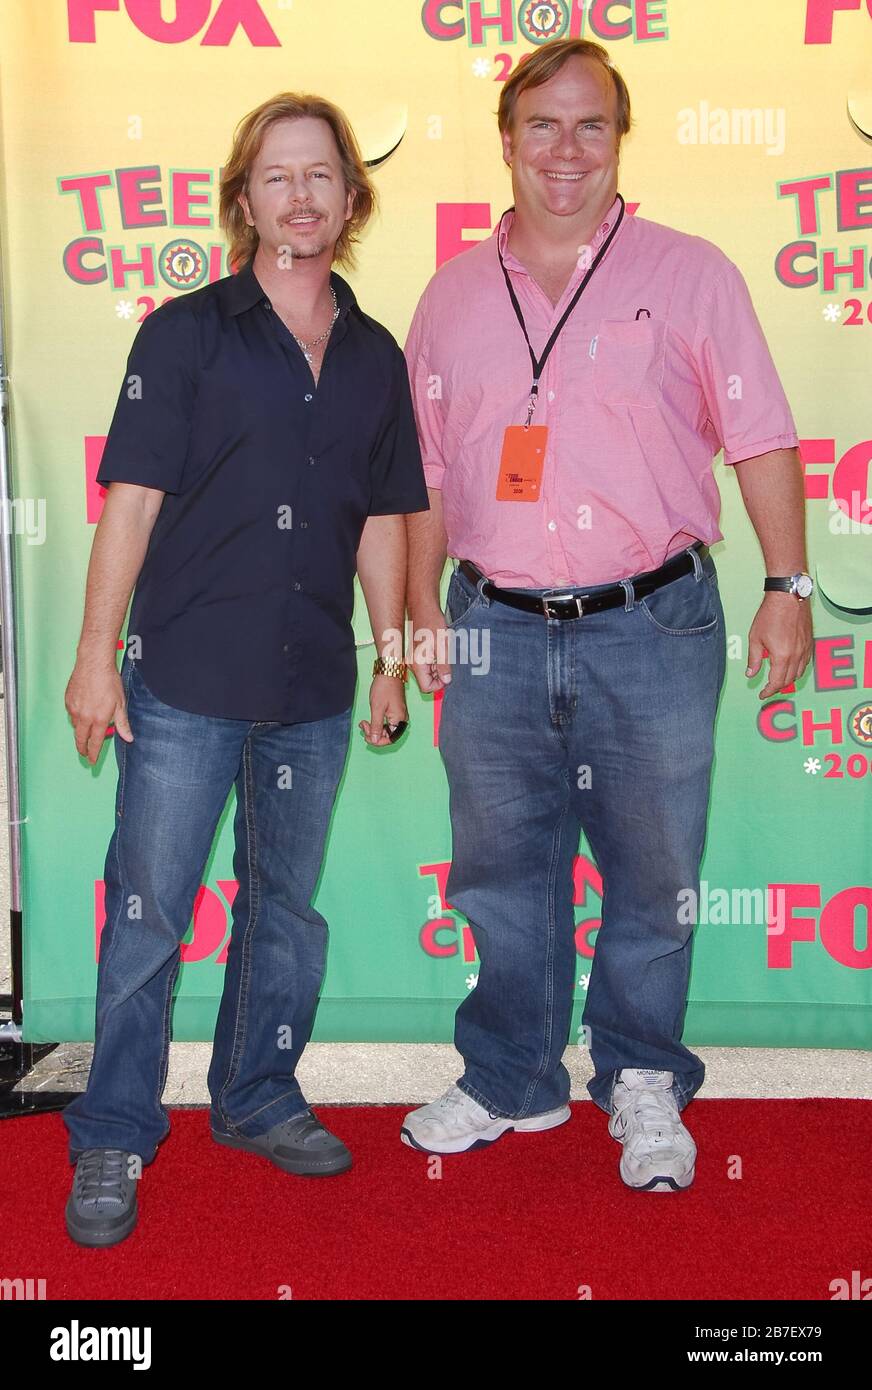 David Spade and Chris Farley's Brother at the 2006 Teen Choice Awards - Arrivals at the Gibson Amphitheter in Universal City, CA. The event took place on Sunday, August 20, 2006.  Photo by: SBM / PictureLux Stock Photo